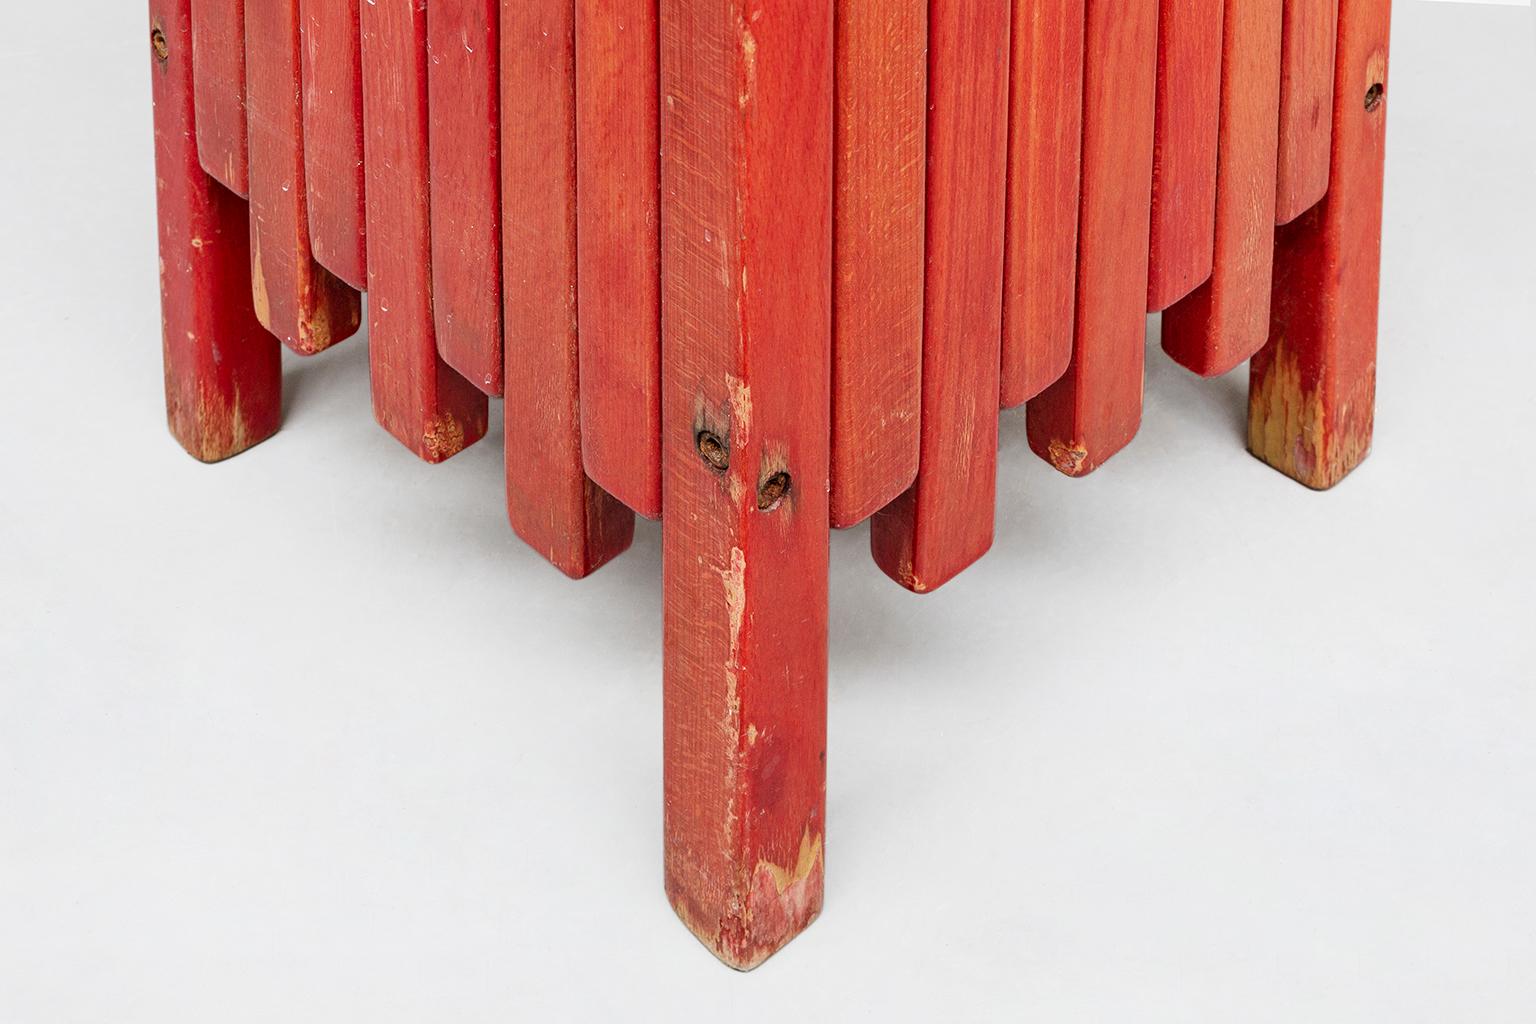 Lacquered Italian Umbrella-Stand in Painted Wood, by Ettore Sottsass for Poltronova, 1962